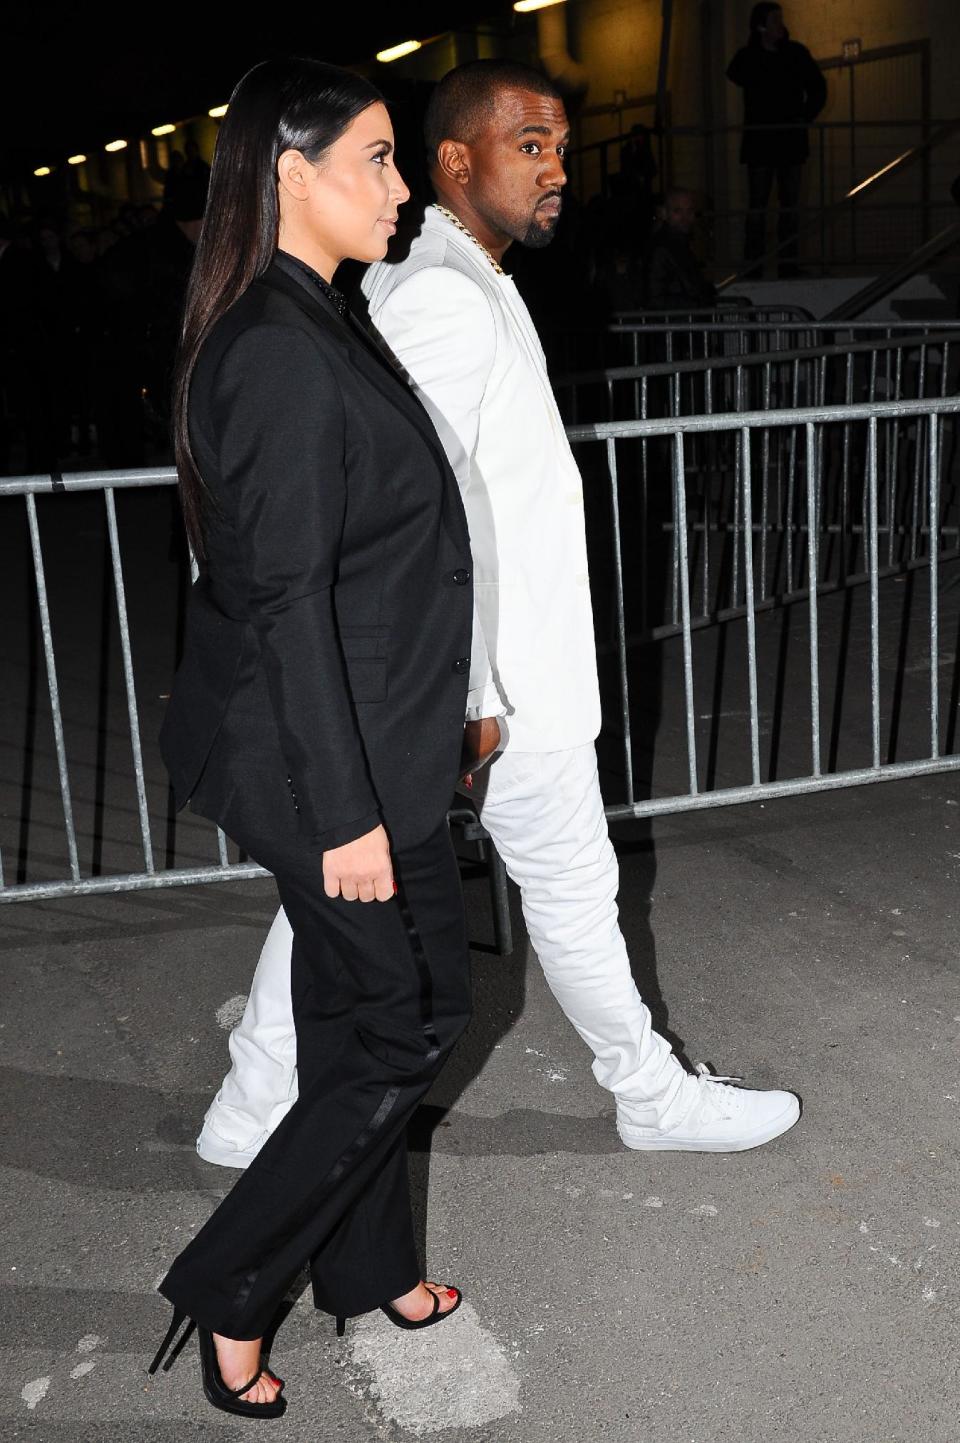 Kim Kardashian and Kanye West arrive at Givenchy's Ready to Wear's Fall-Winter 2013-2014 fashion collection presented Sunday, March 3, 2013 in Paris. (AP Photo/Zacharie Scheurer)